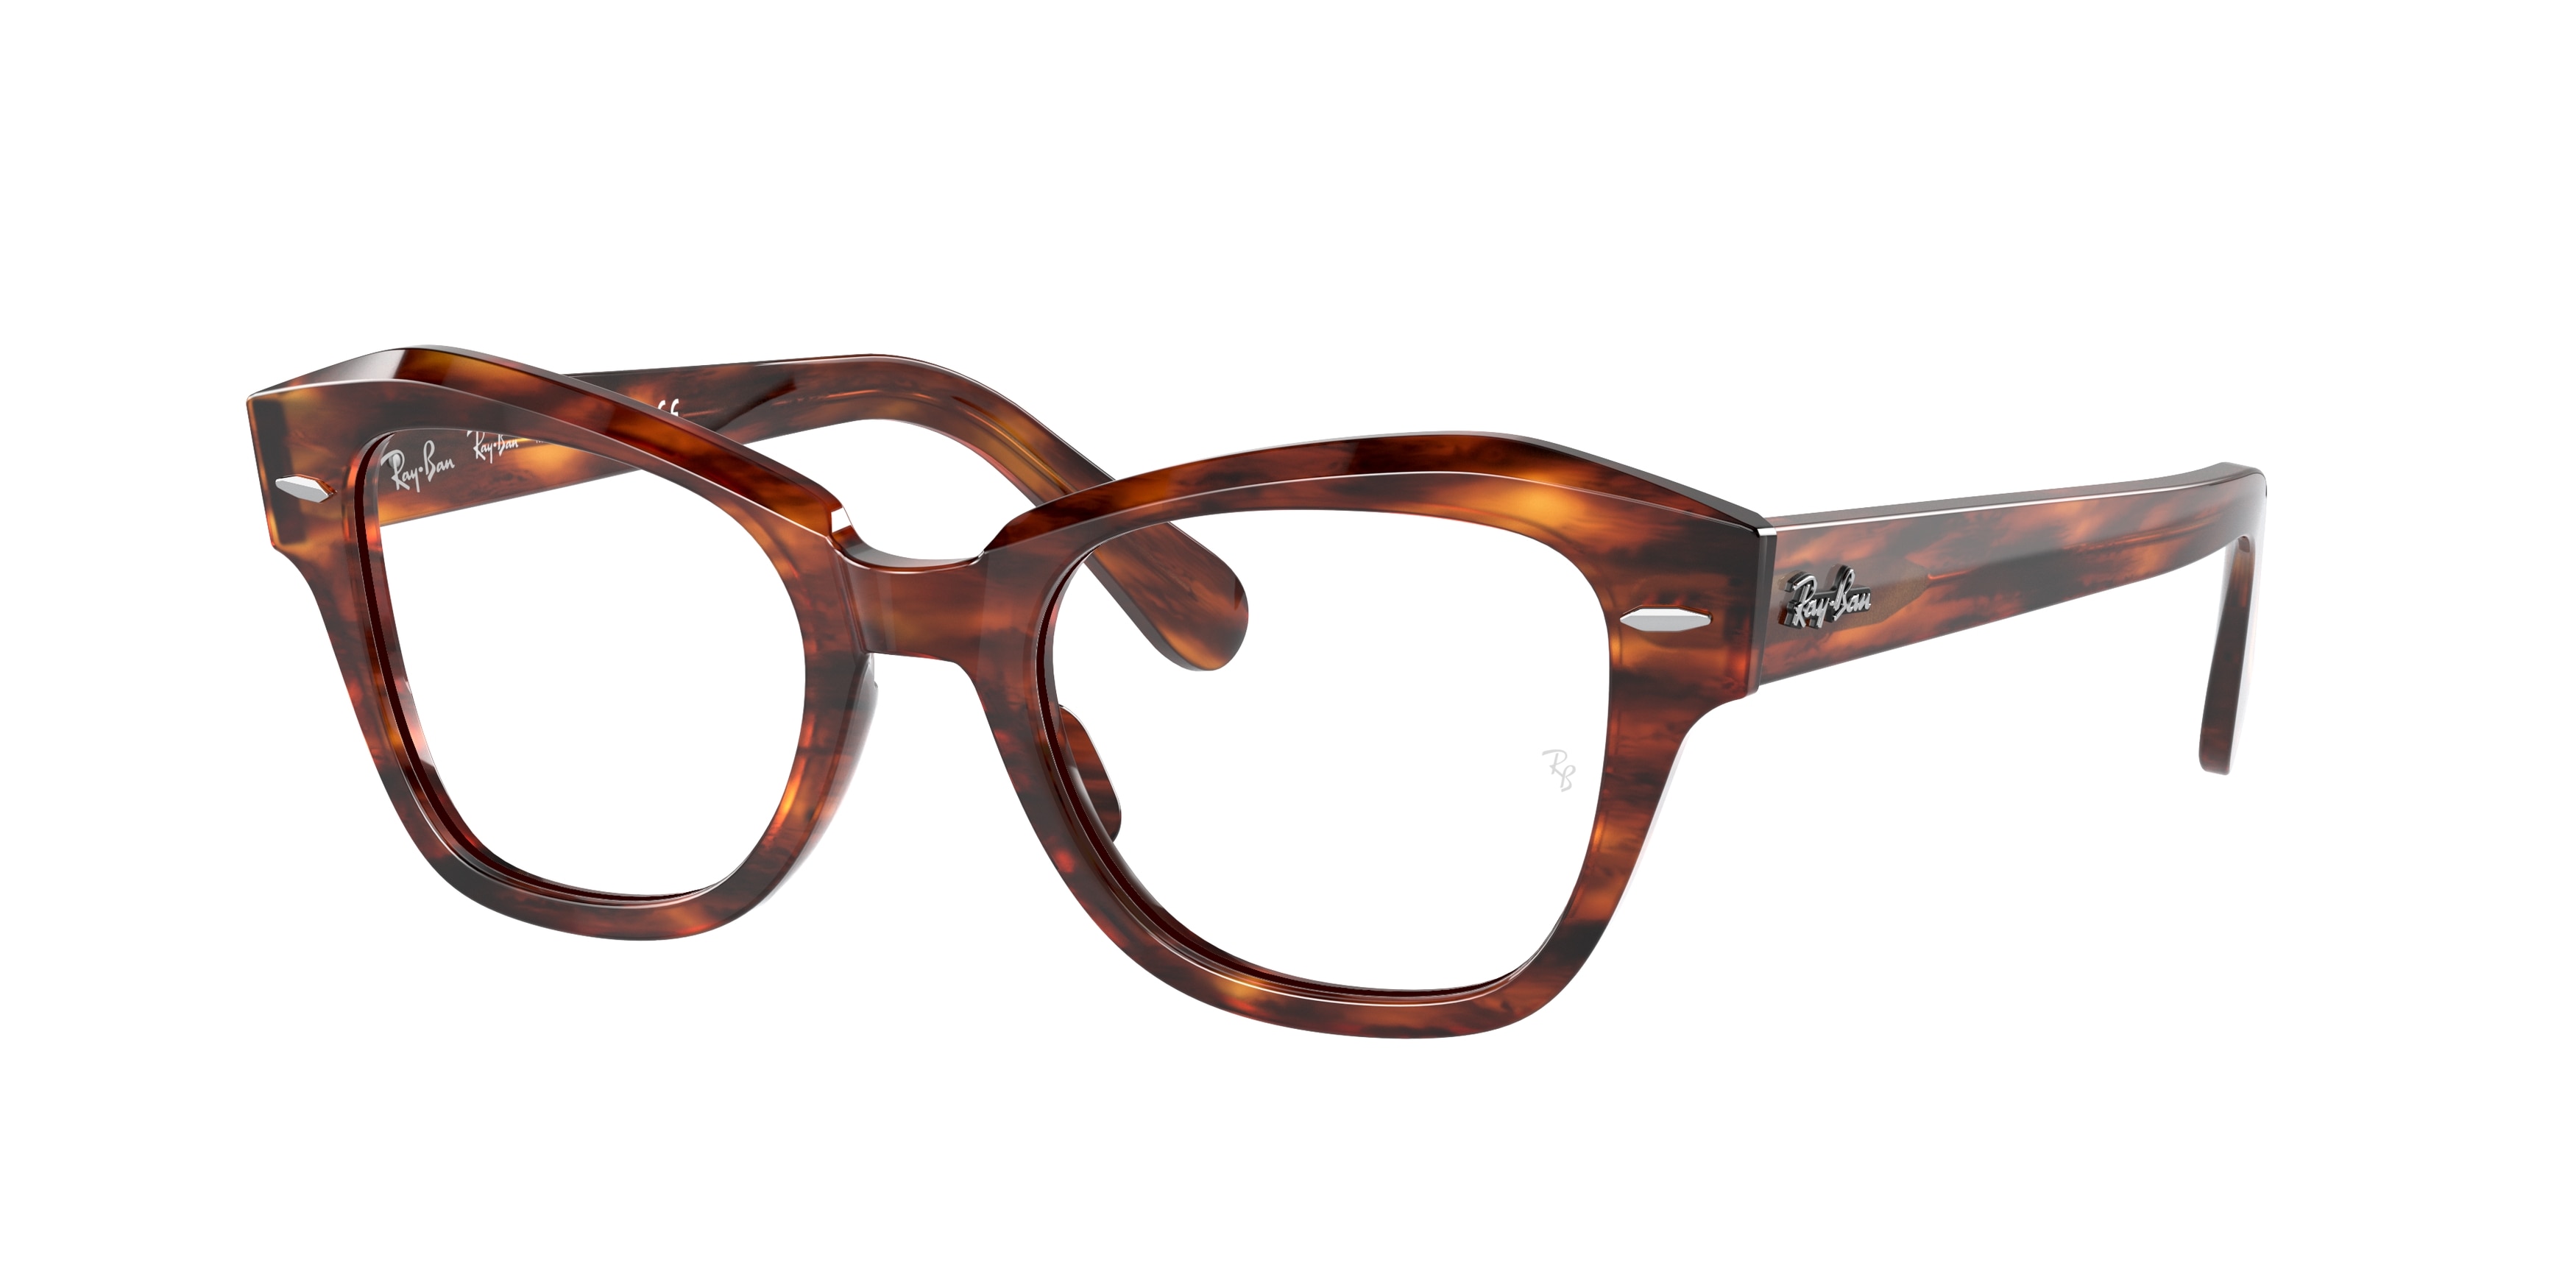 Ray-ban State Street RX5486 2144 Tortoise